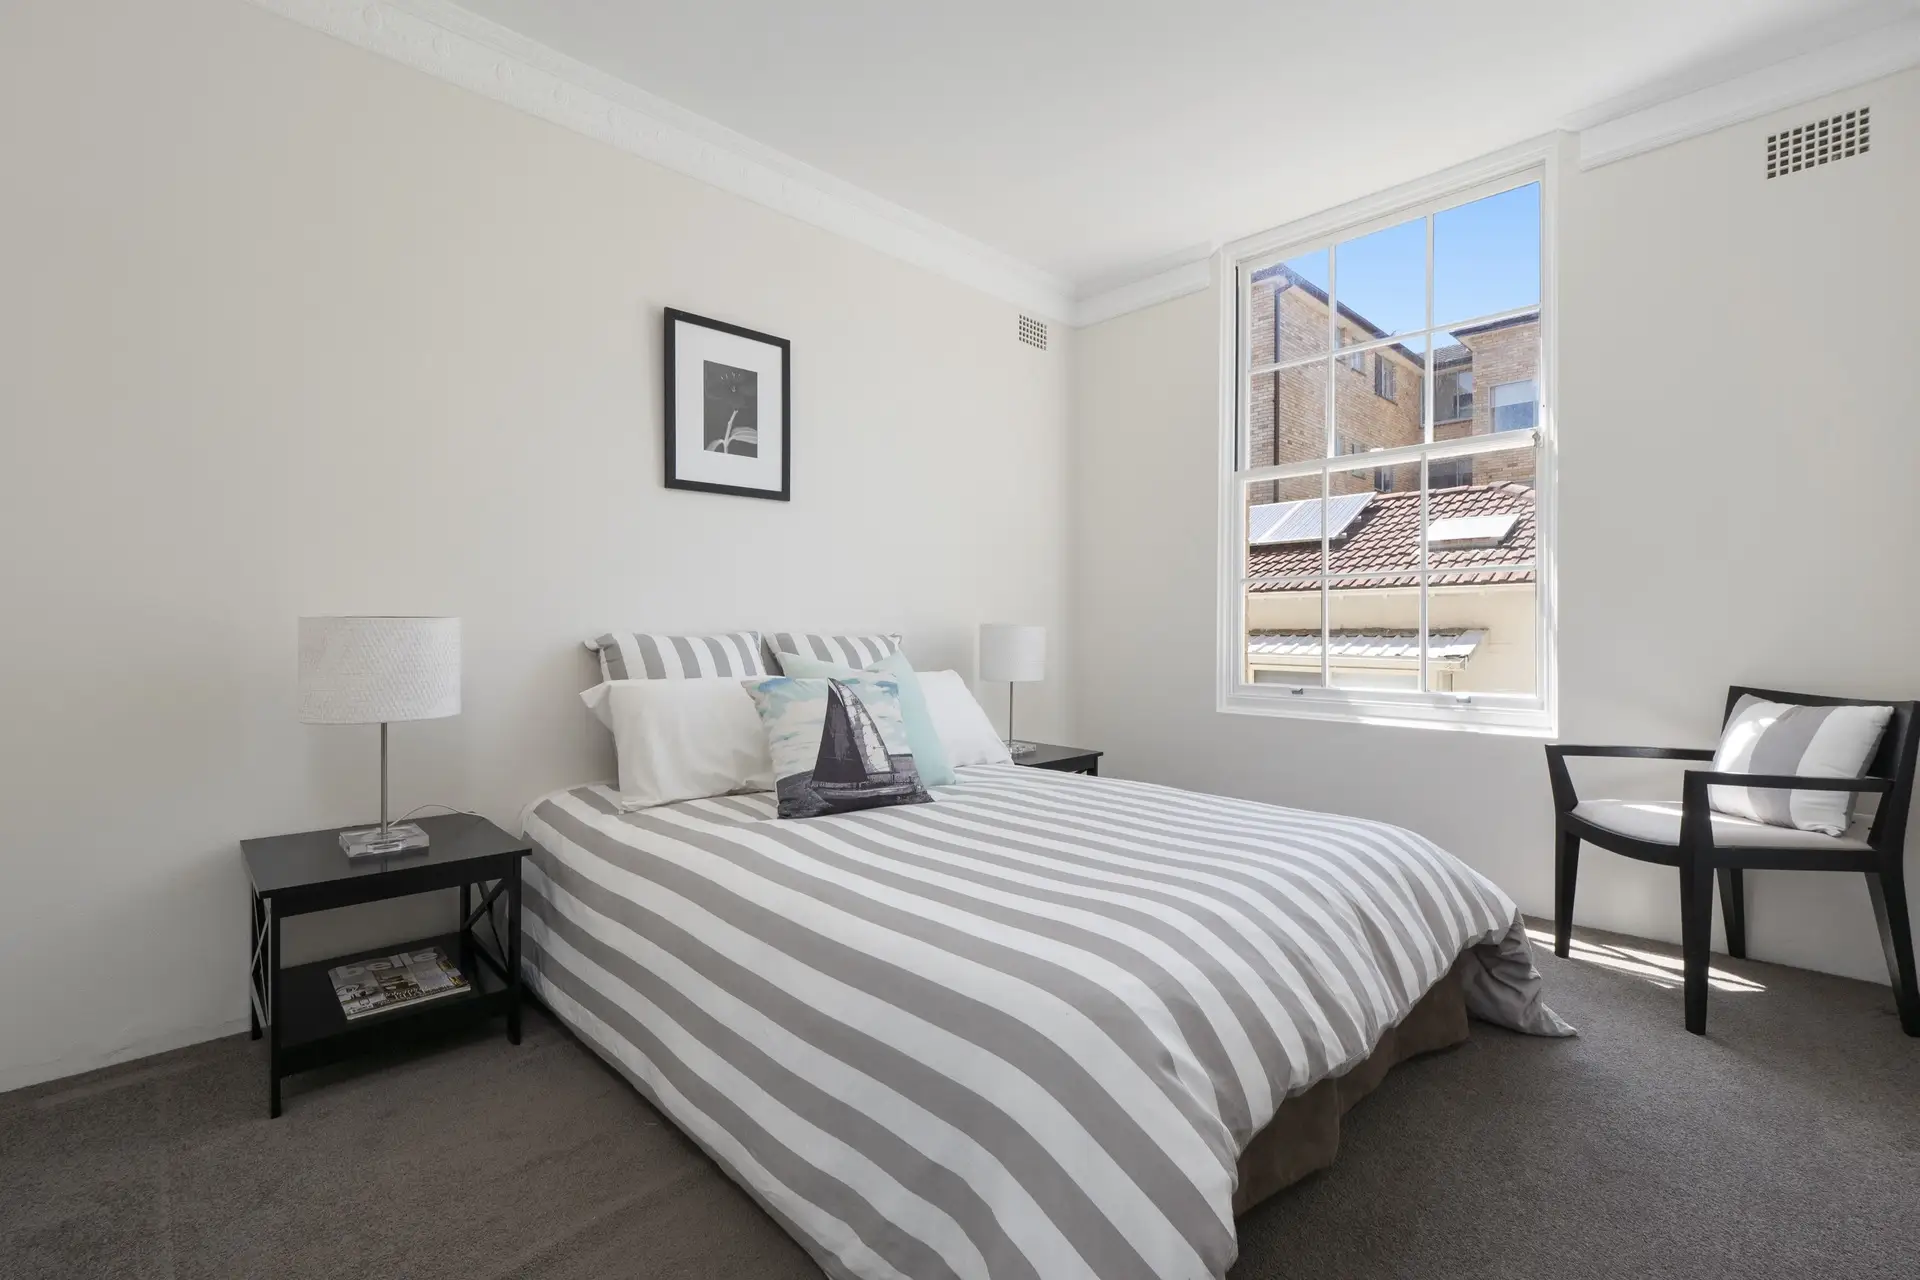 2/29-33 The Avenue, Rose Bay Sold by Bradfield Badgerfox - image 1